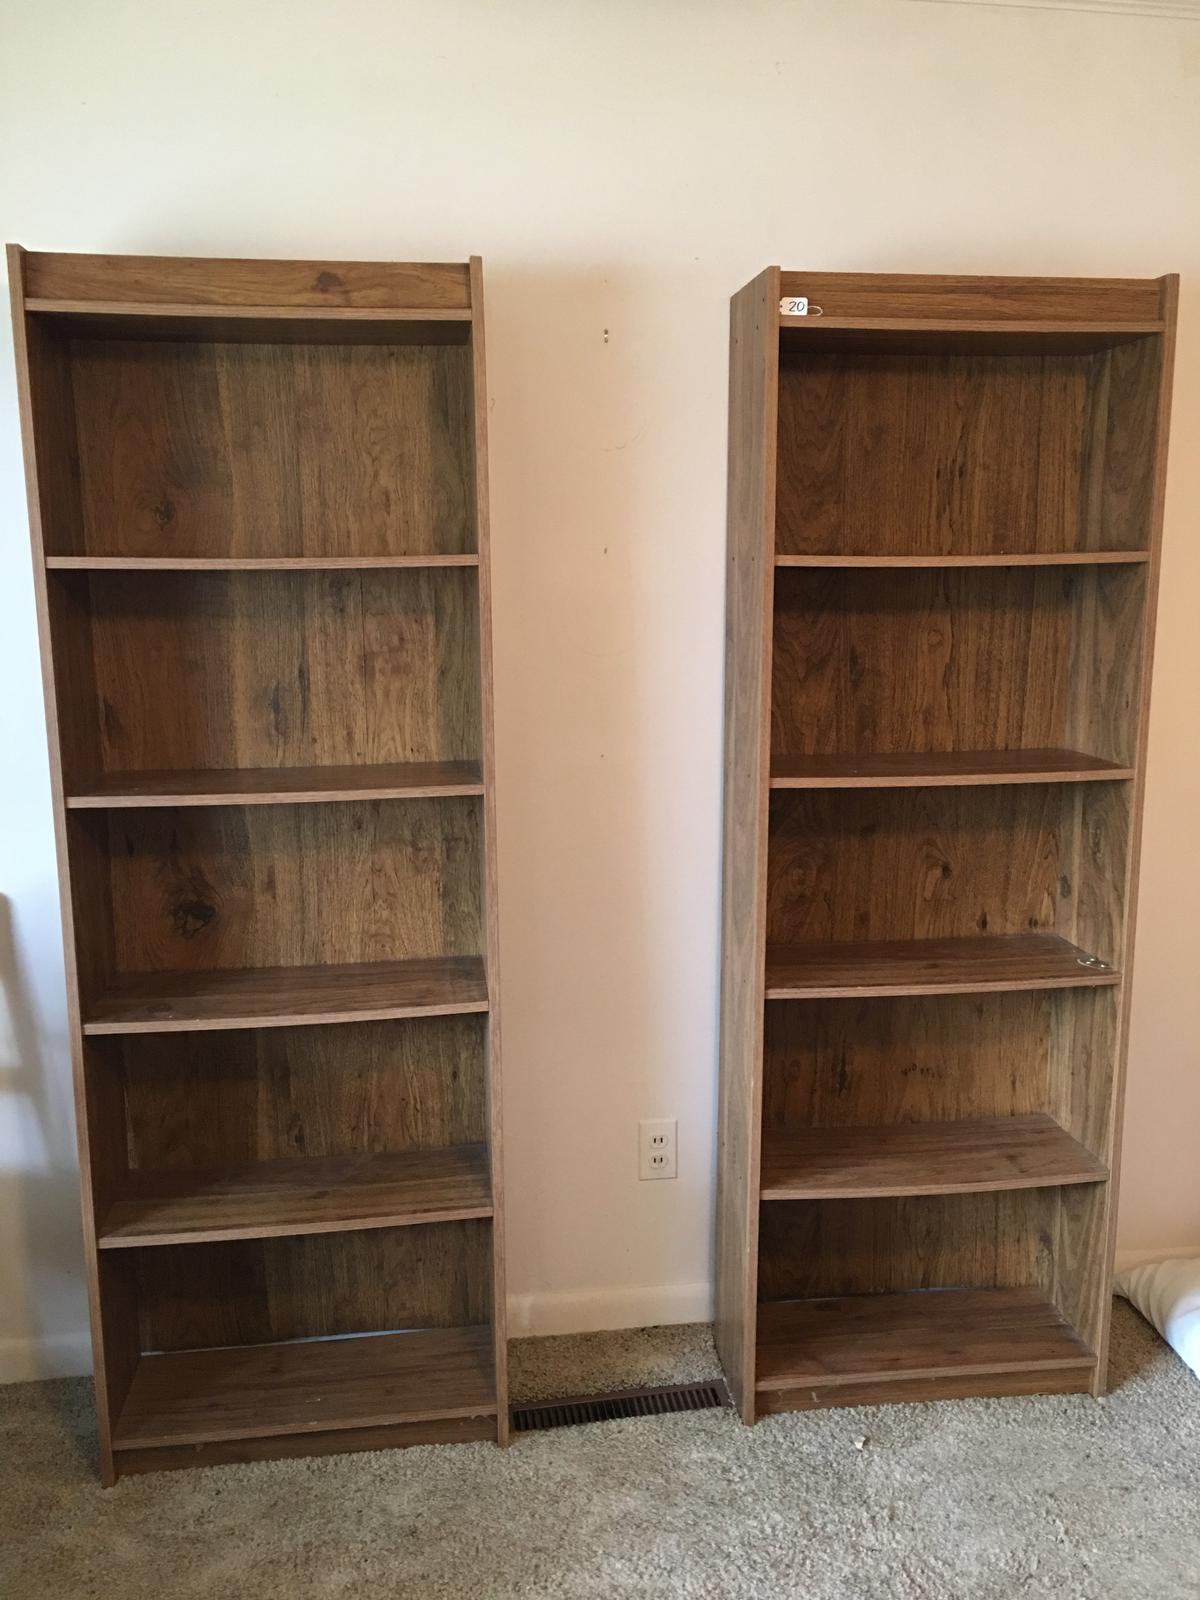 Pair Of Sauder Style Bookcases Are 24"W. x 9.5"D. x 72"T.